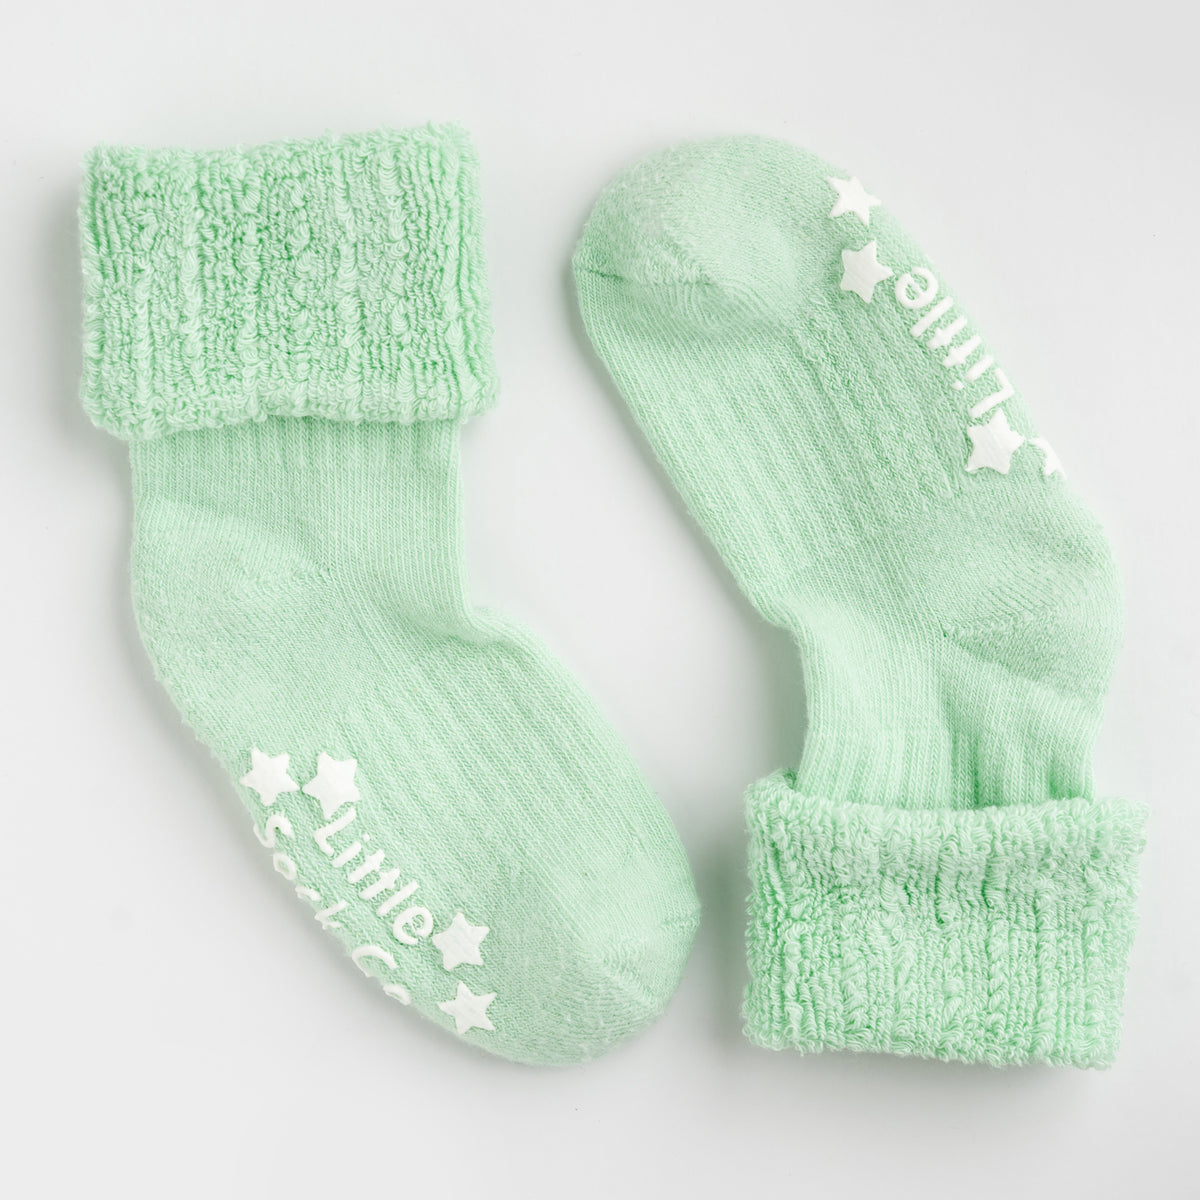 Cosy Stay on Winter Warm Non Slip Baby Socks - 3 Pack in Apple and Cloud Grey - 0-2 Years